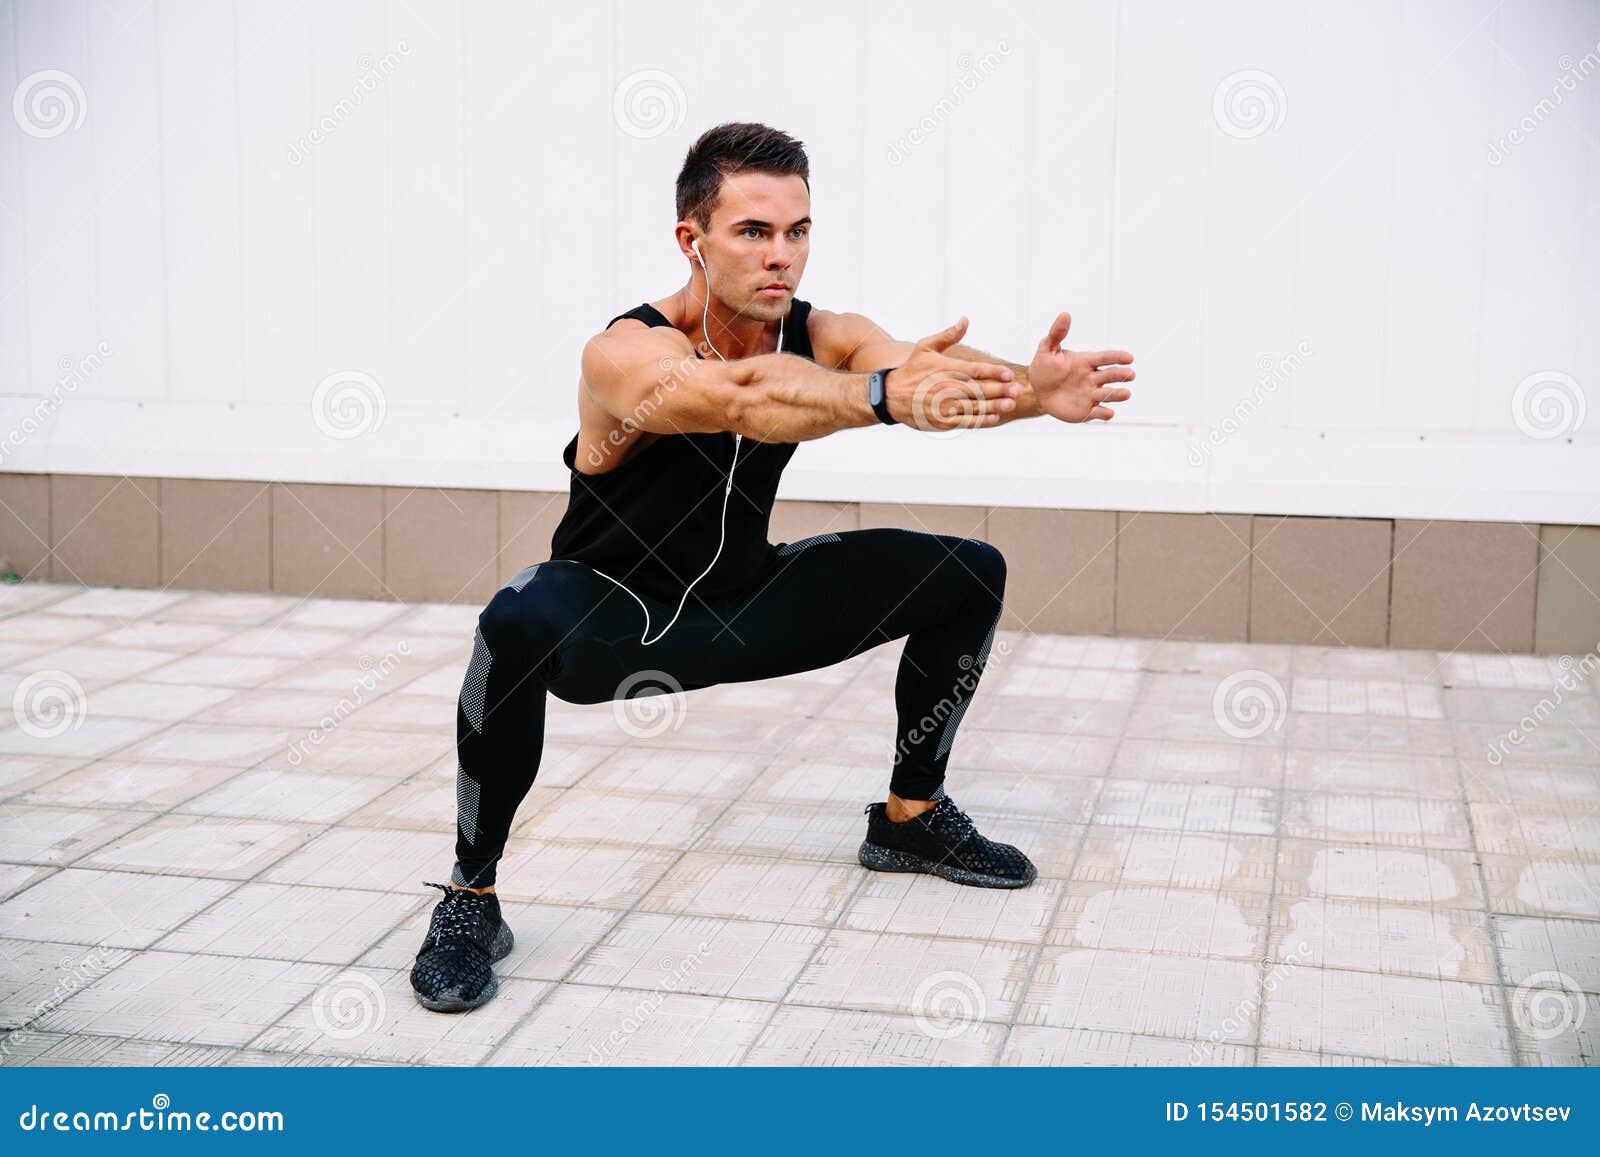 Athlete Doing Squats, Outdoors Stock Photo - Image of recreation, full:  154501582